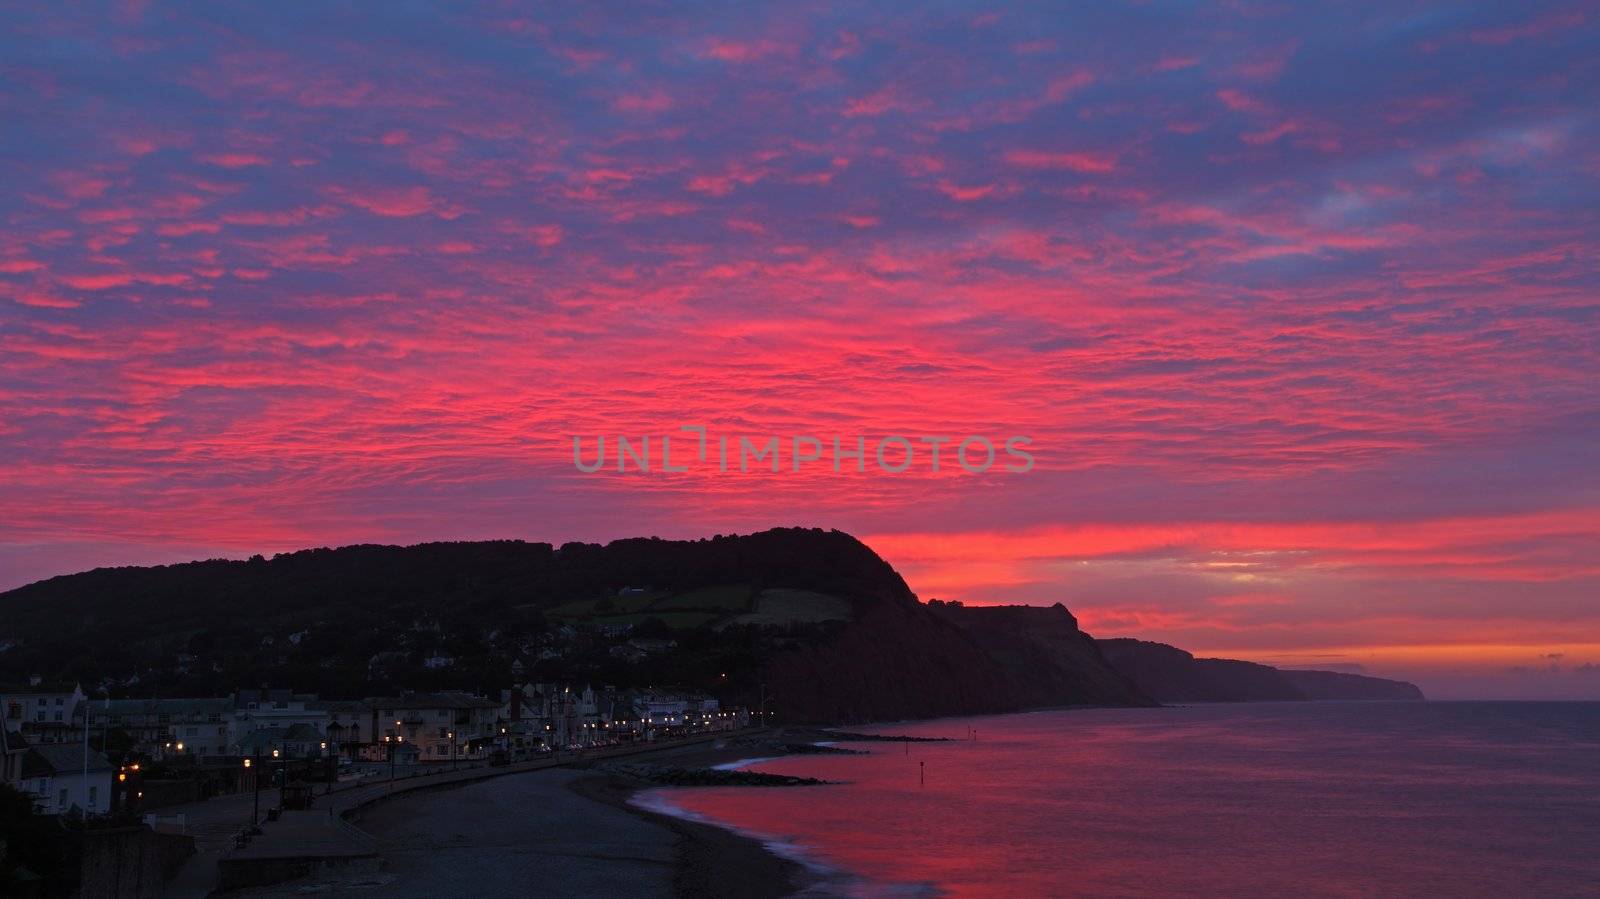 Sunset Sidmouth by olliemt